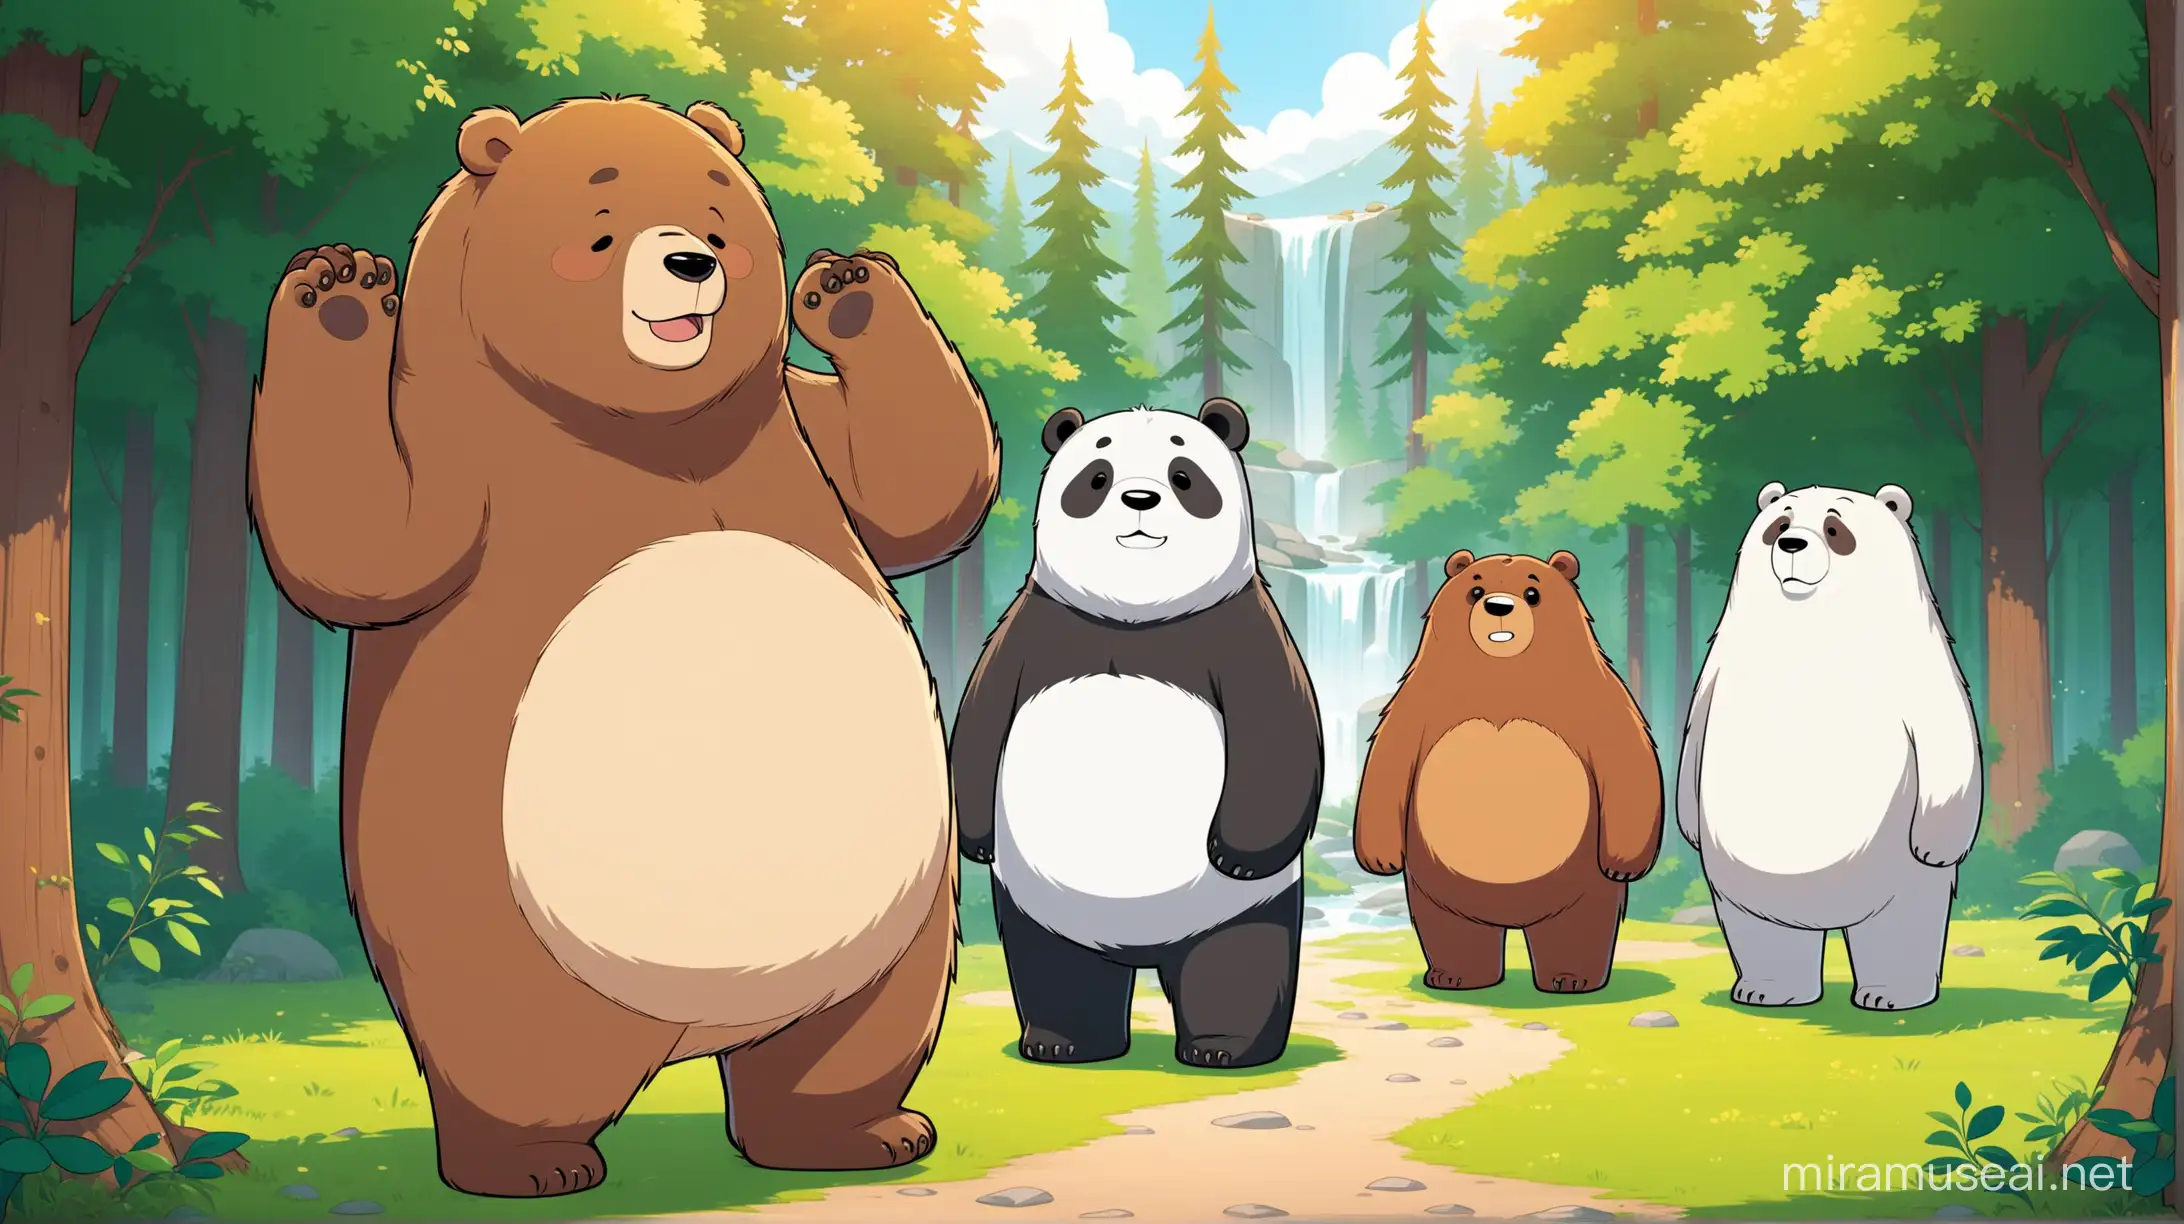 Panda, Polar Bear and Brown Bear, three brothers from the cartoon group We Bare Bears, live in their house in the forest.